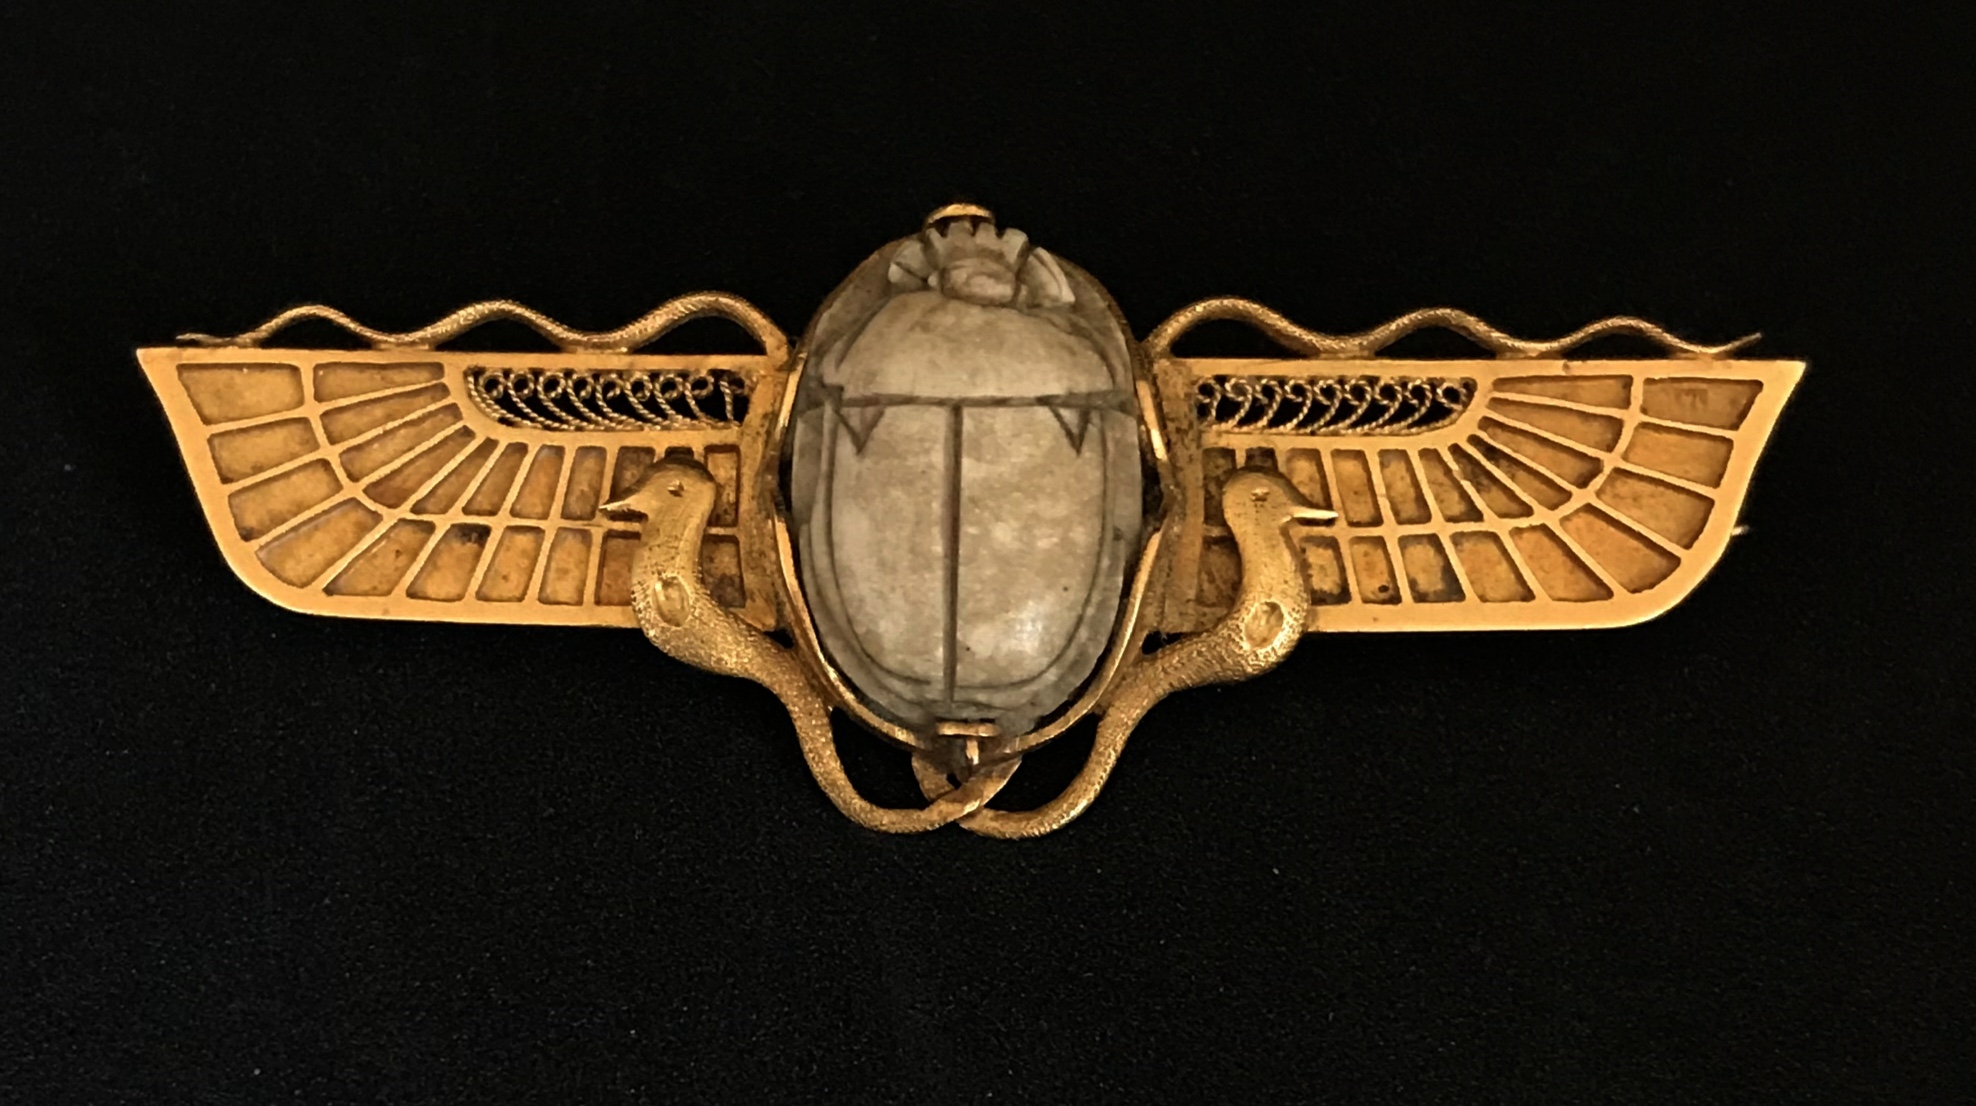 An antique gold Egyptian Revival brooch set with a carved hardstone scarab indistinctly marked,